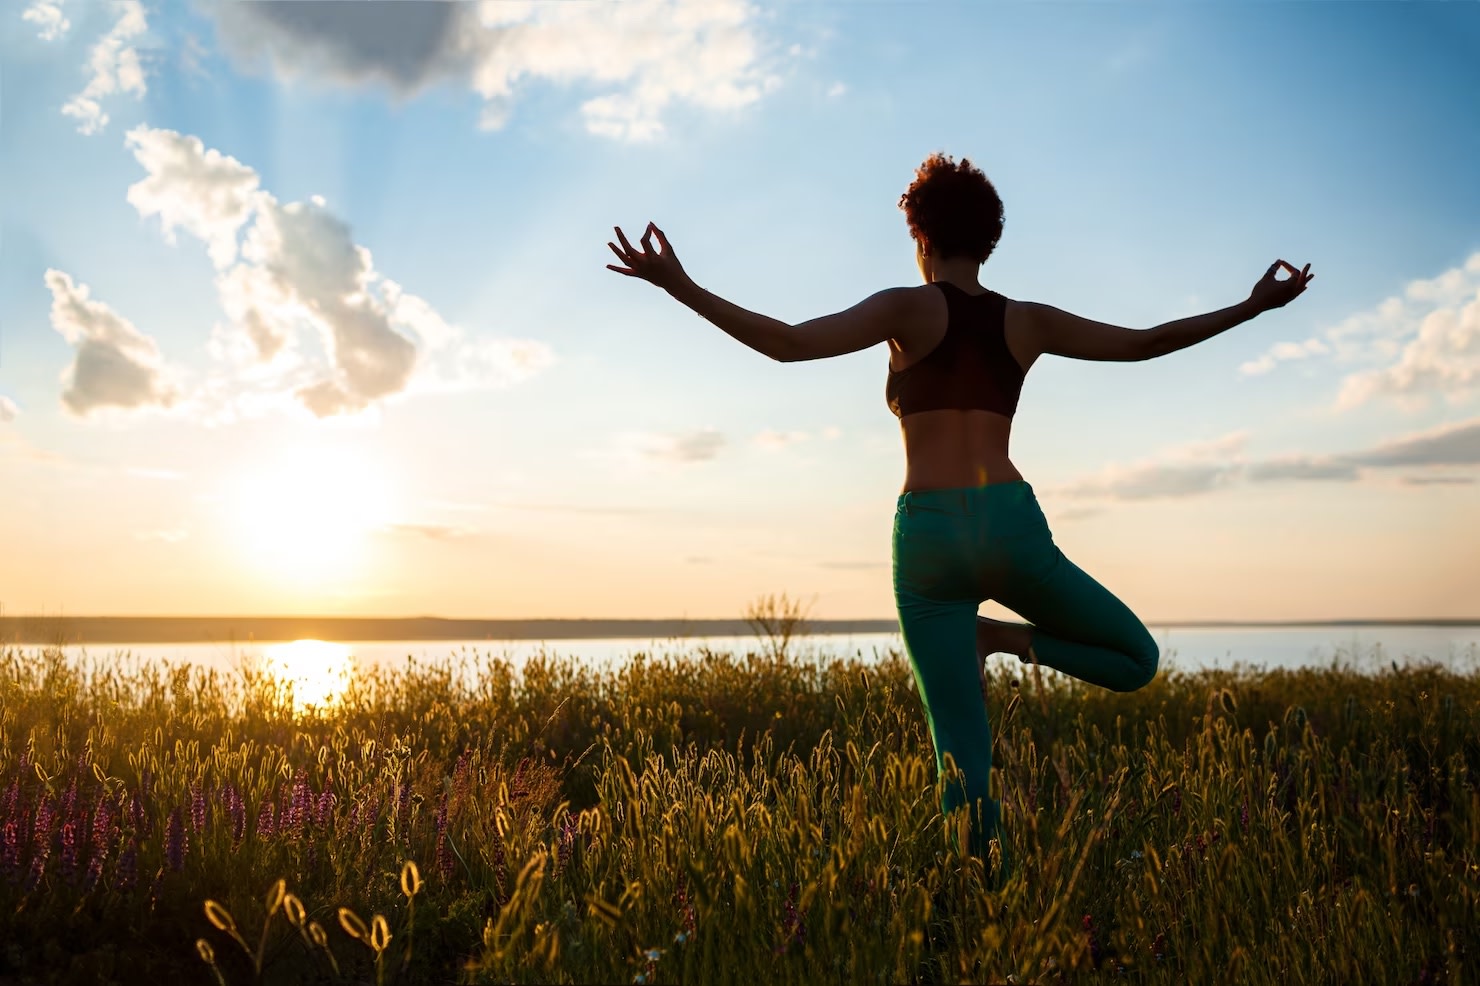 Image of woman standing in field overlooking water while doing yoga pose with sunrise